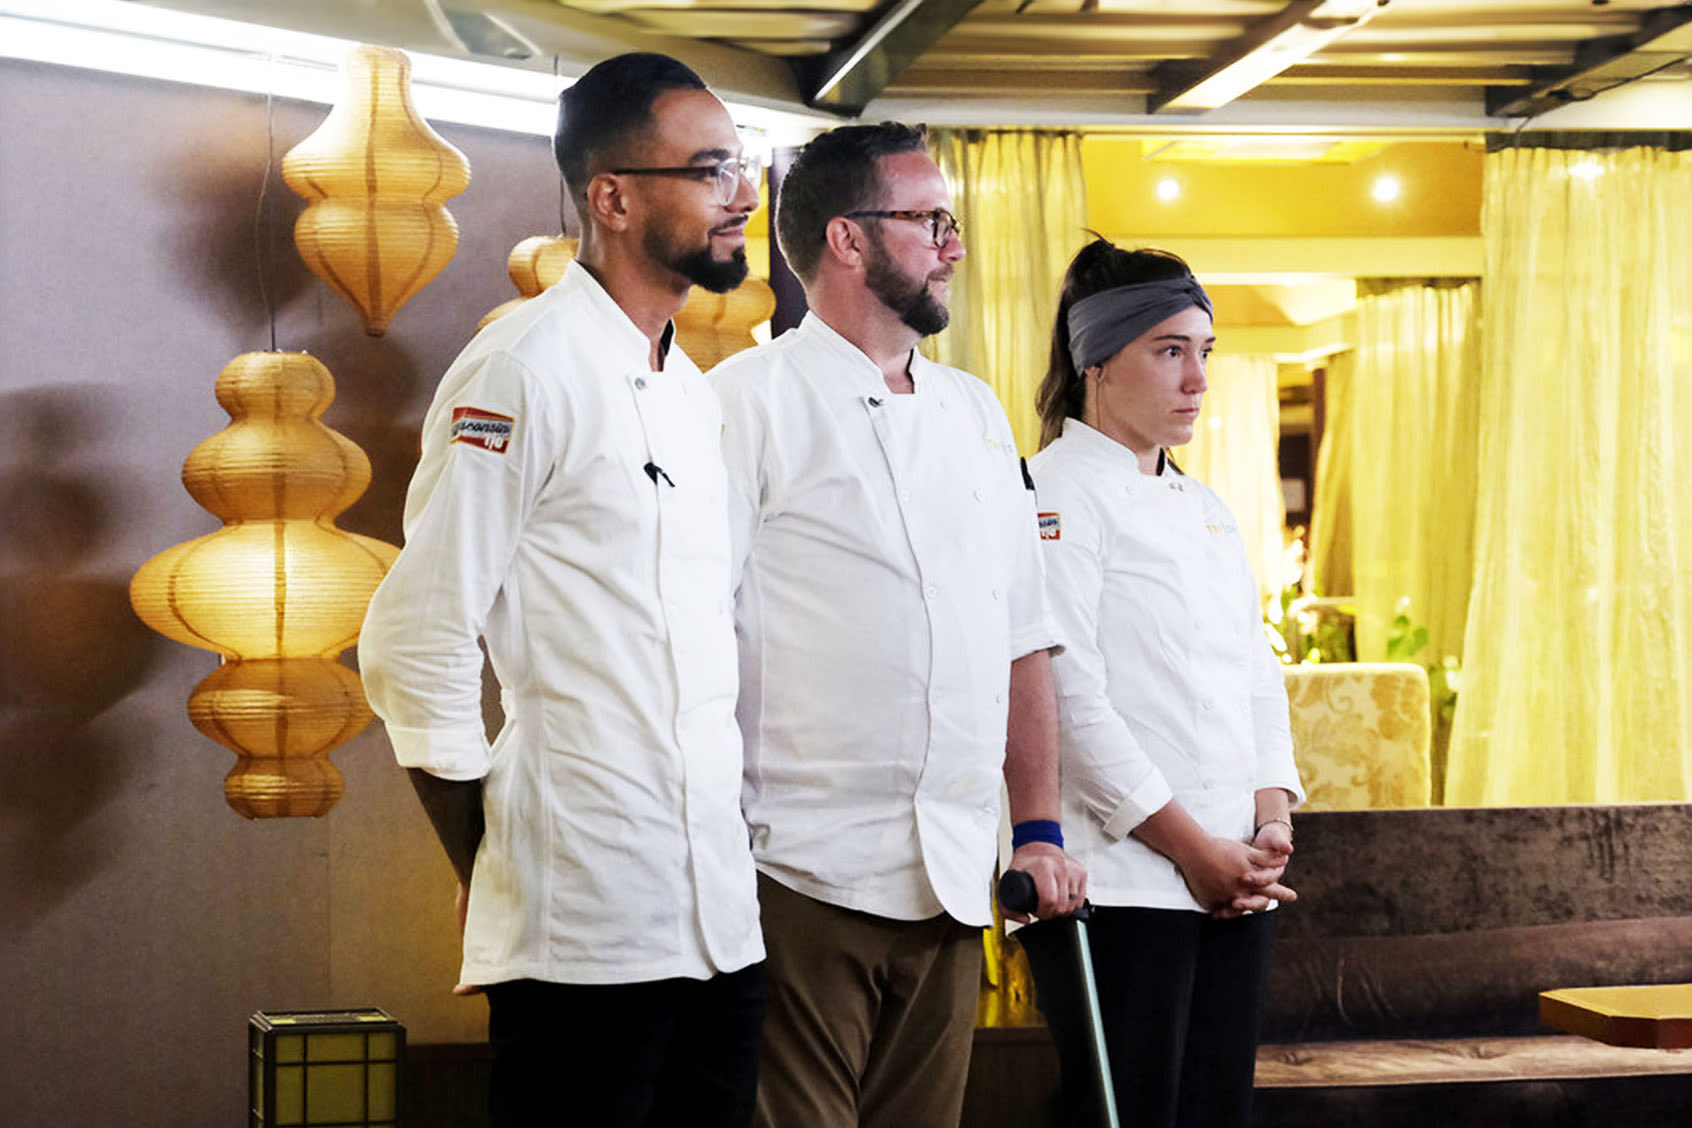 Exclusive: A sneak peek at the "Top Chef: Wisconsin" finale